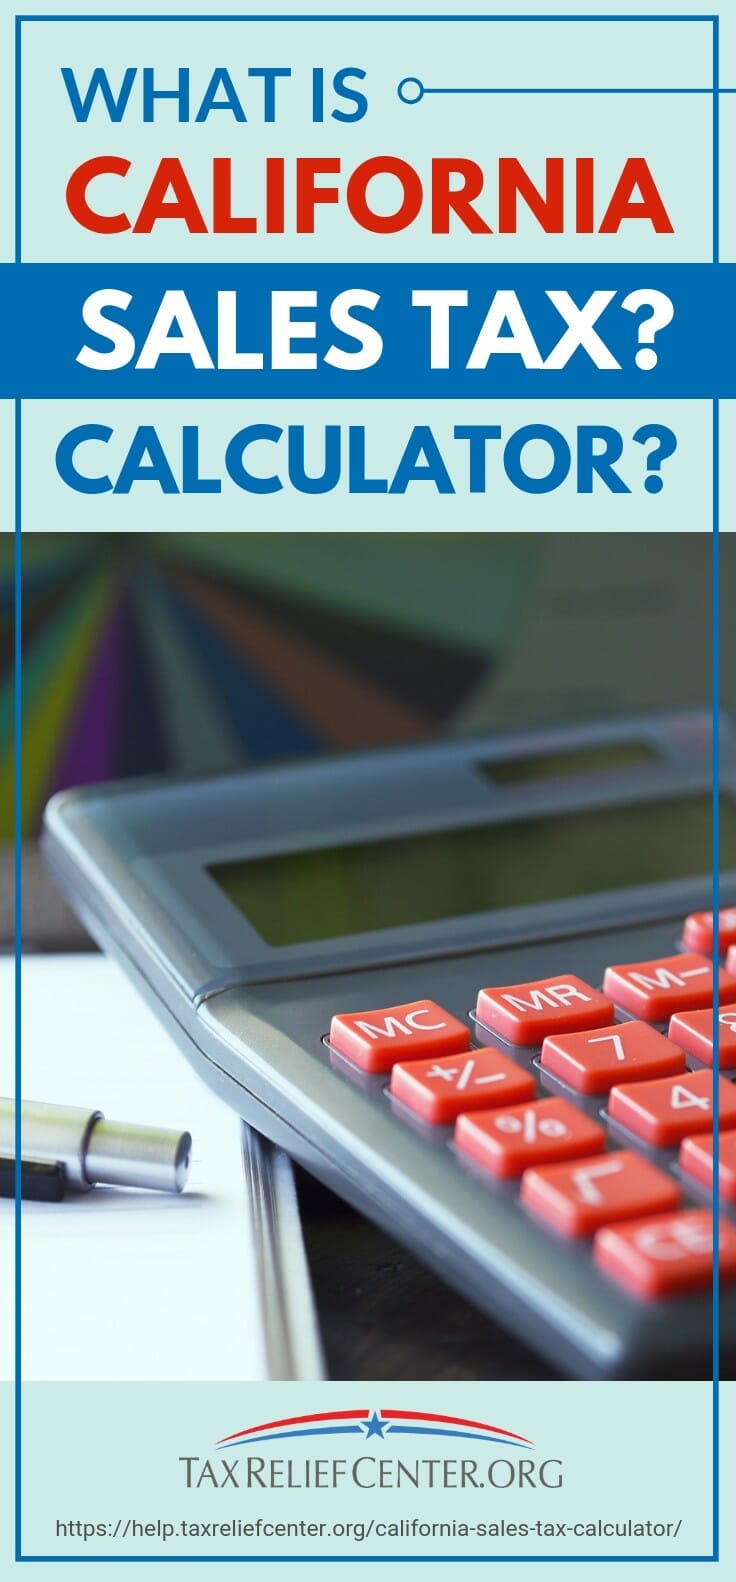 What Is California Sales Tax Calculator? | https://help.taxreliefcenter.org/california-sales-tax-calculator/